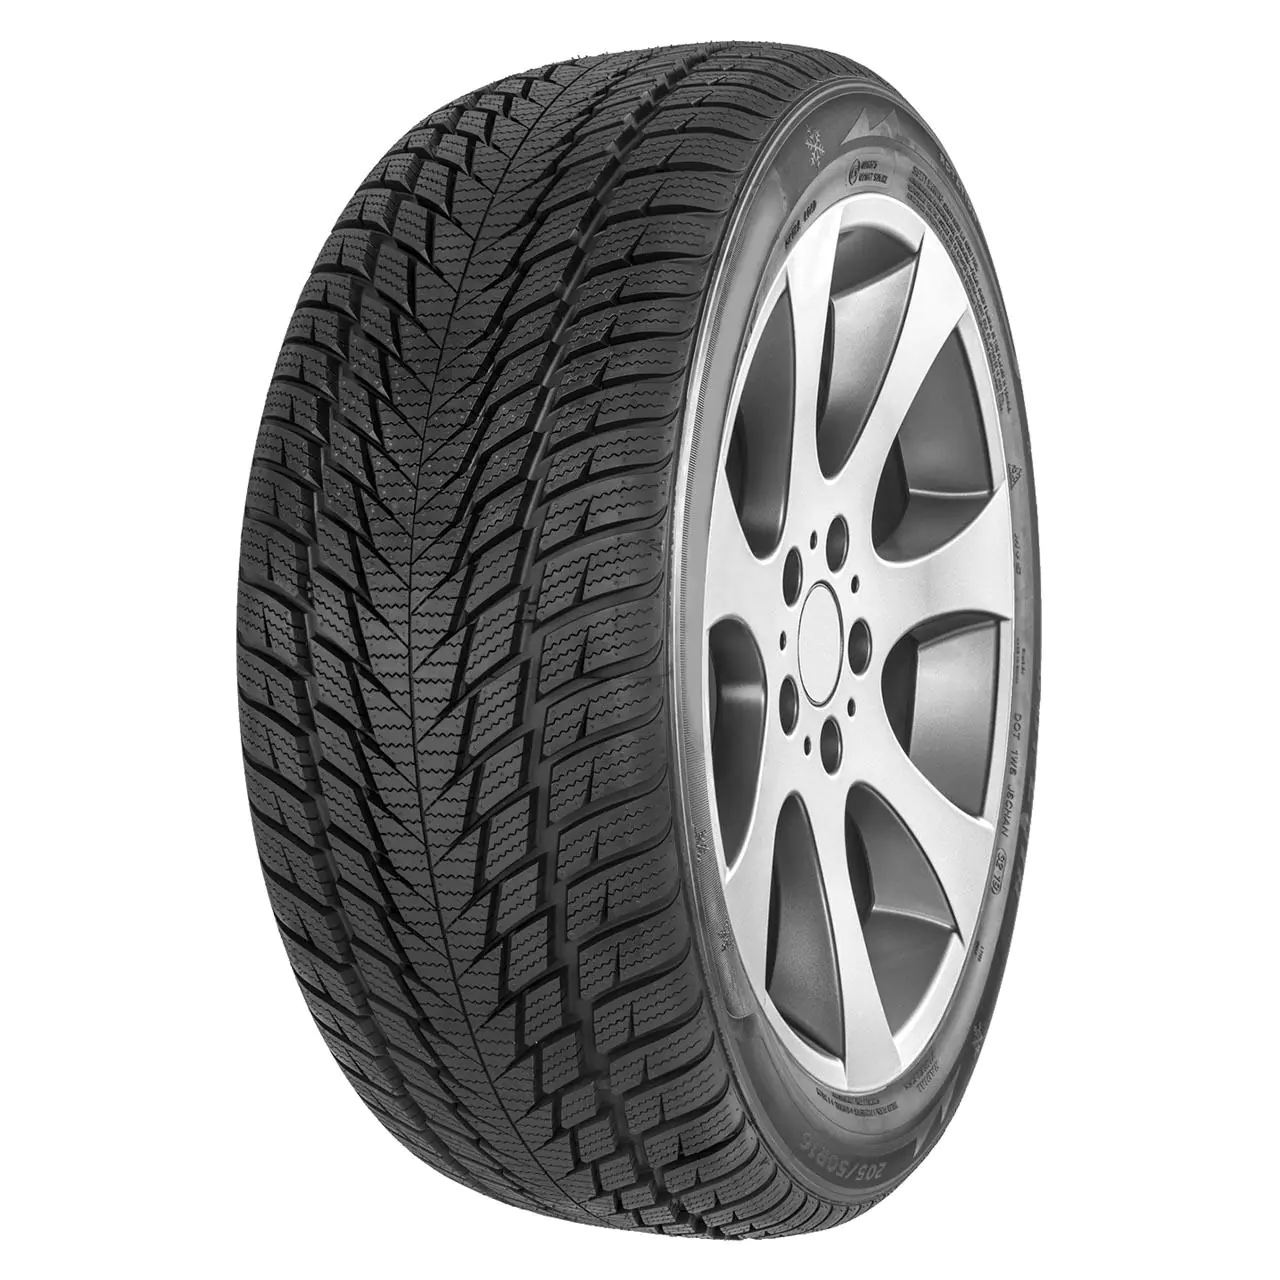 Gomme Autovettura Fortuna 245/40 R20 99V GOWIN UHP3 XL M+S Invernale